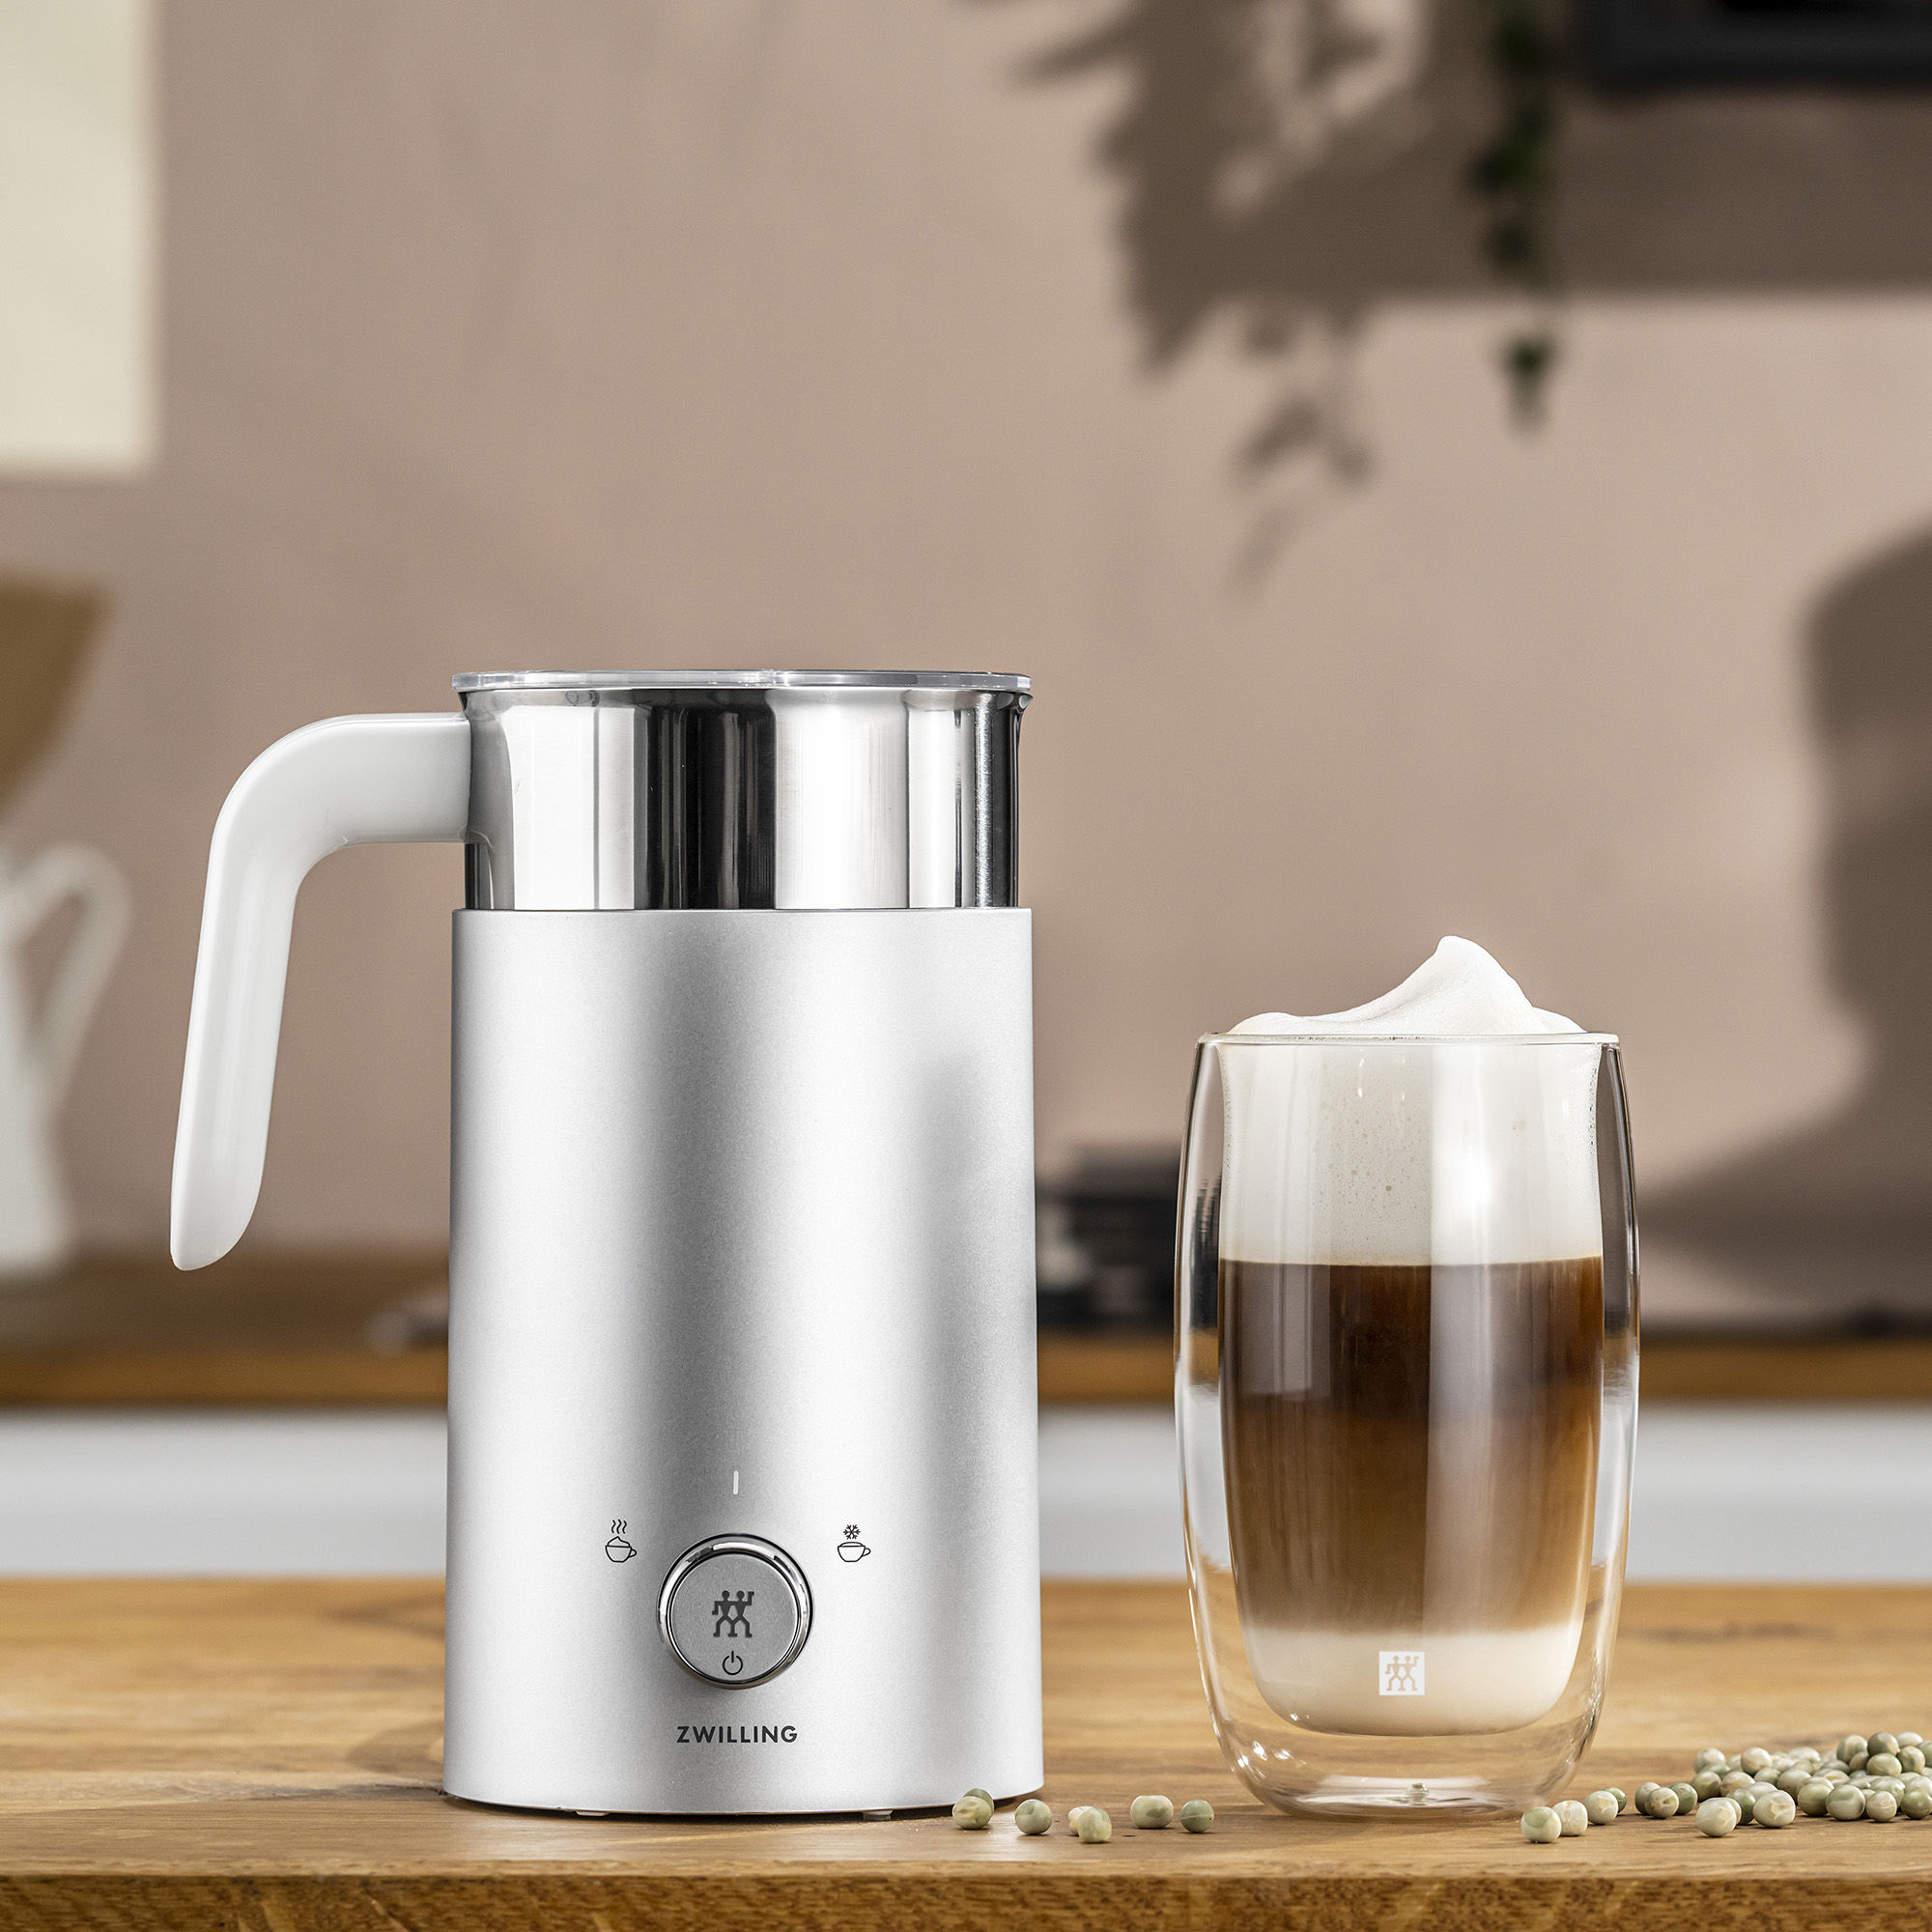 Automatic Milk Frother Coffee Foamer Container Soft Foam